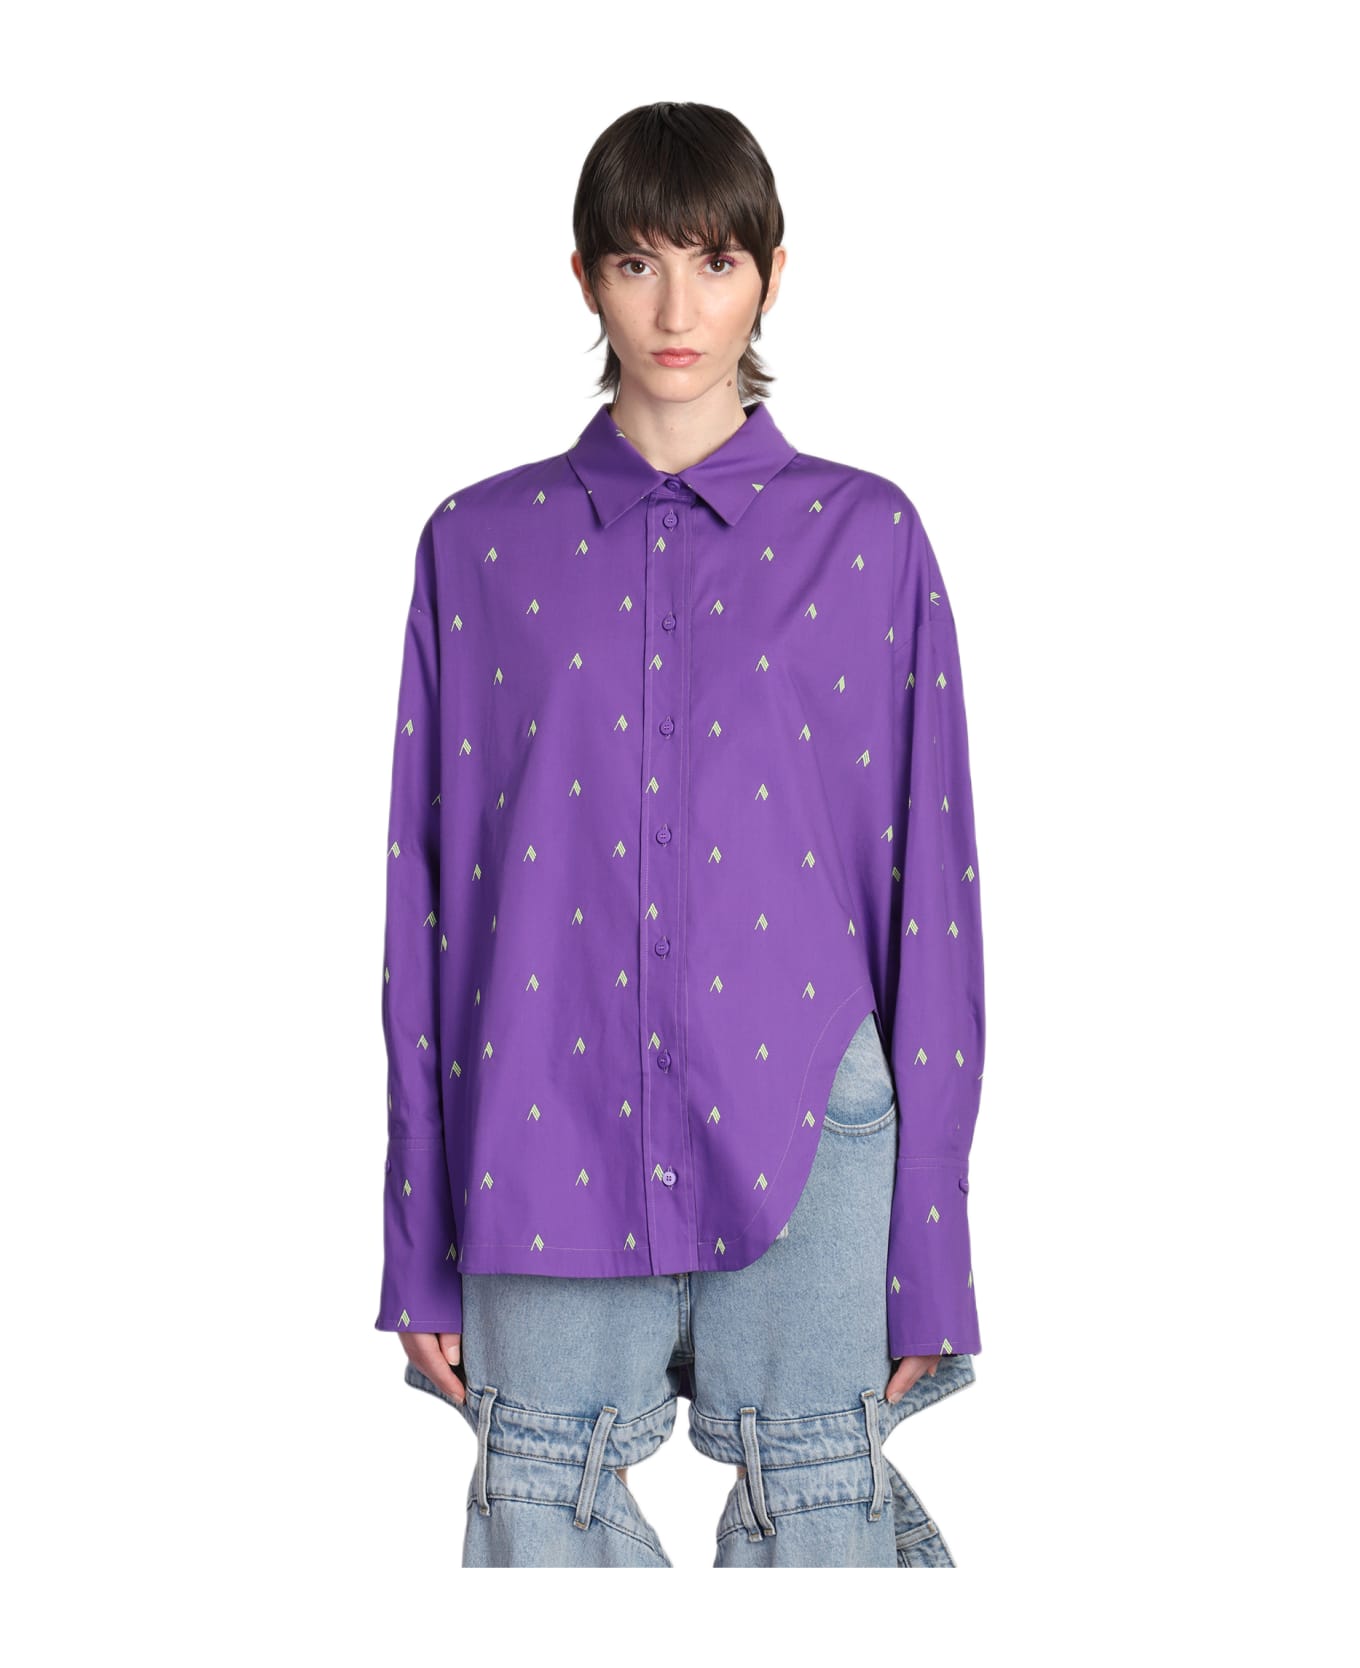 The Attico All-over Patterned Button-up Shirt - PURPLELIGHTGREEN シャツ